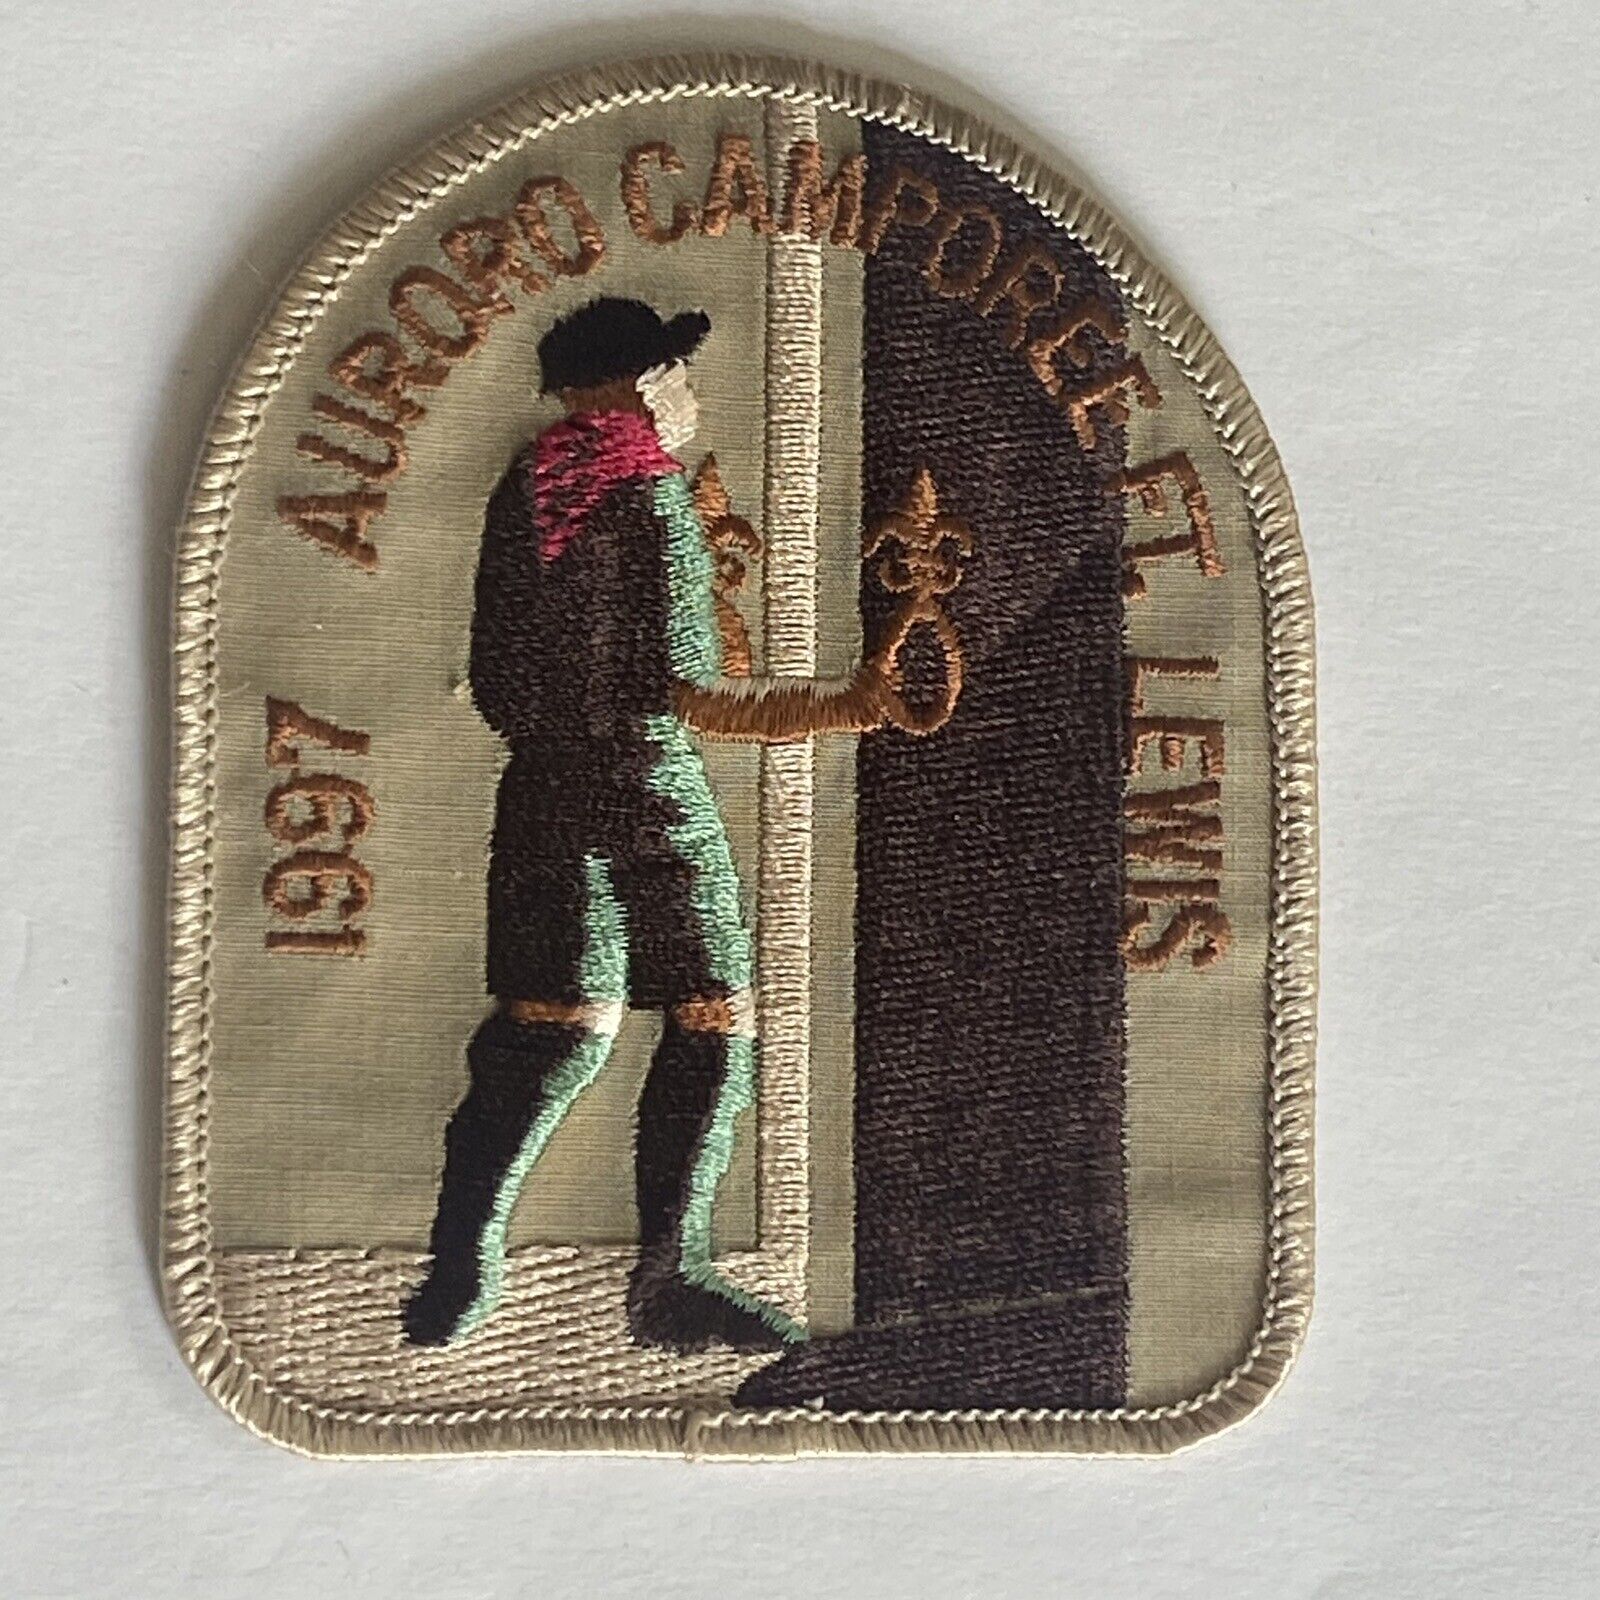 Vintage 1997 BOY SCOUTS OF AMERICA Patch Auroro Camporee Ft. Lewis